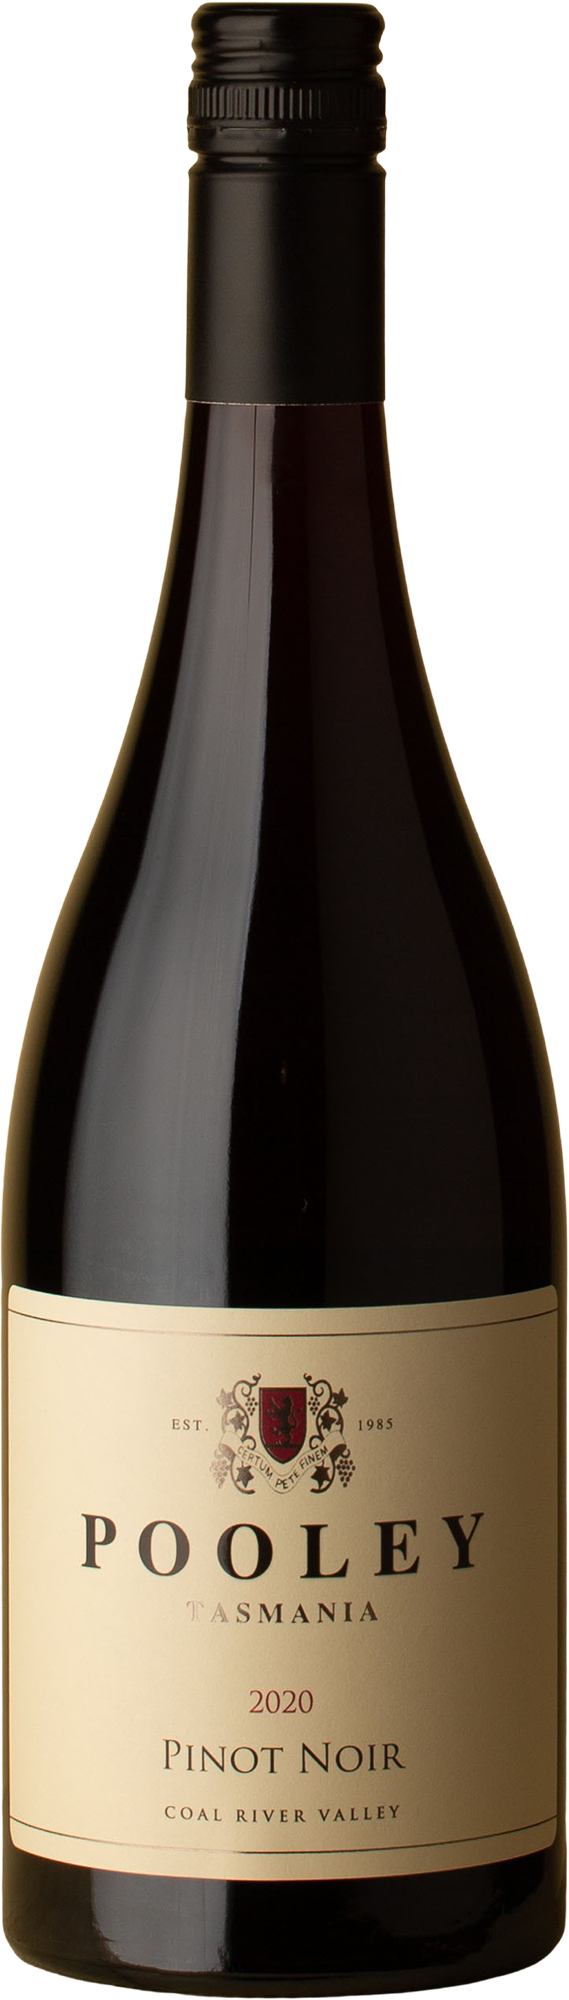 Pooley - Pinot Noir 2020 Red Wine